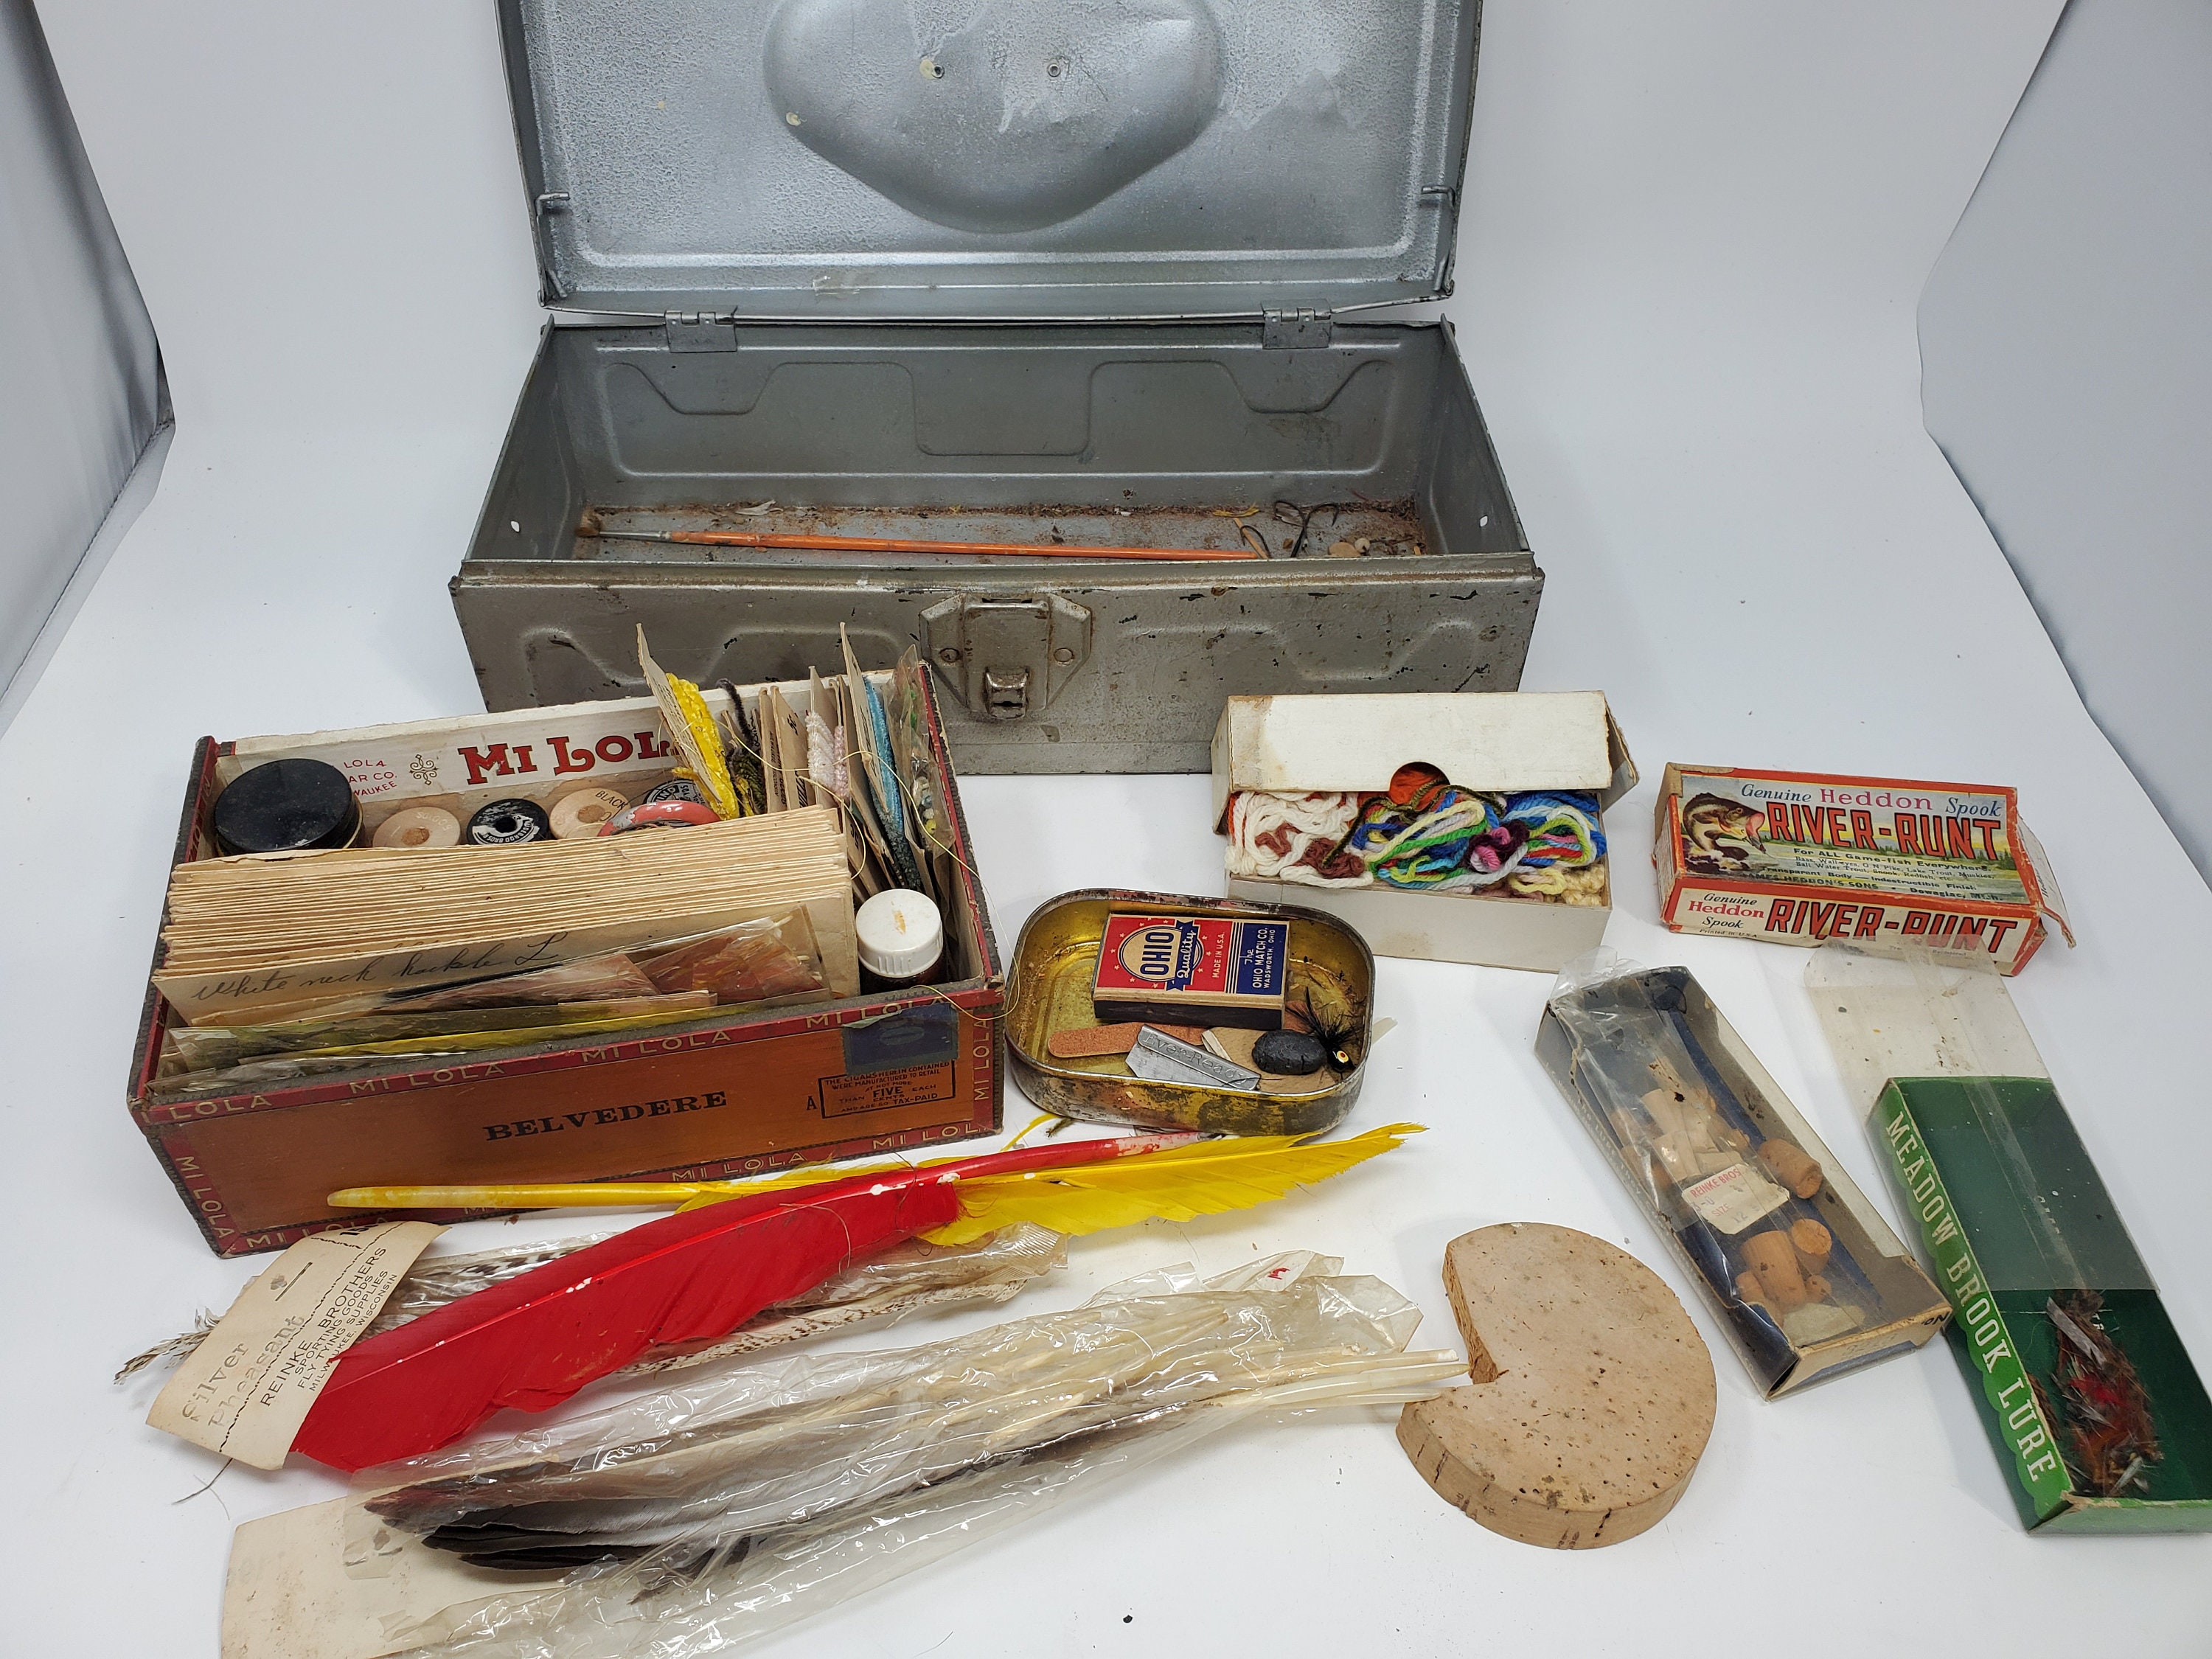 Vintage Old Fly Fishing Lurer Making Kit, Fishing, Tackle Box, Fly Fishing,  Old Advertising, Repurpose Décor, Crafts, Feathers, Northwoods 